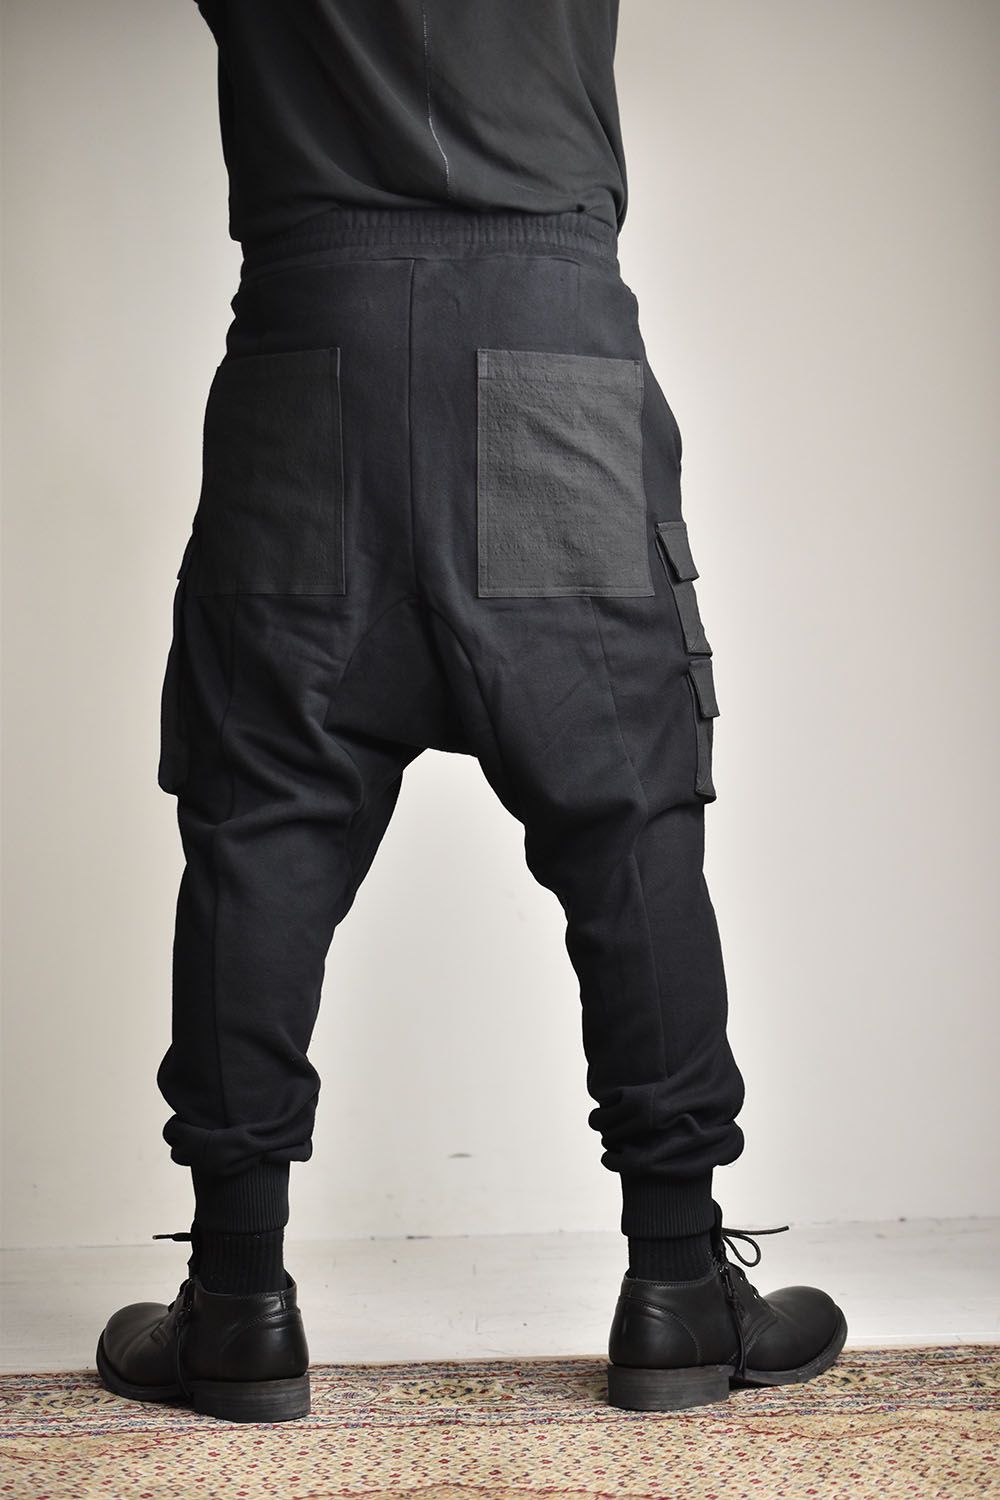 D.HYGEN - Non-ply Yarn Lined Drop Crotch Cargo Wide Jogger Pants 